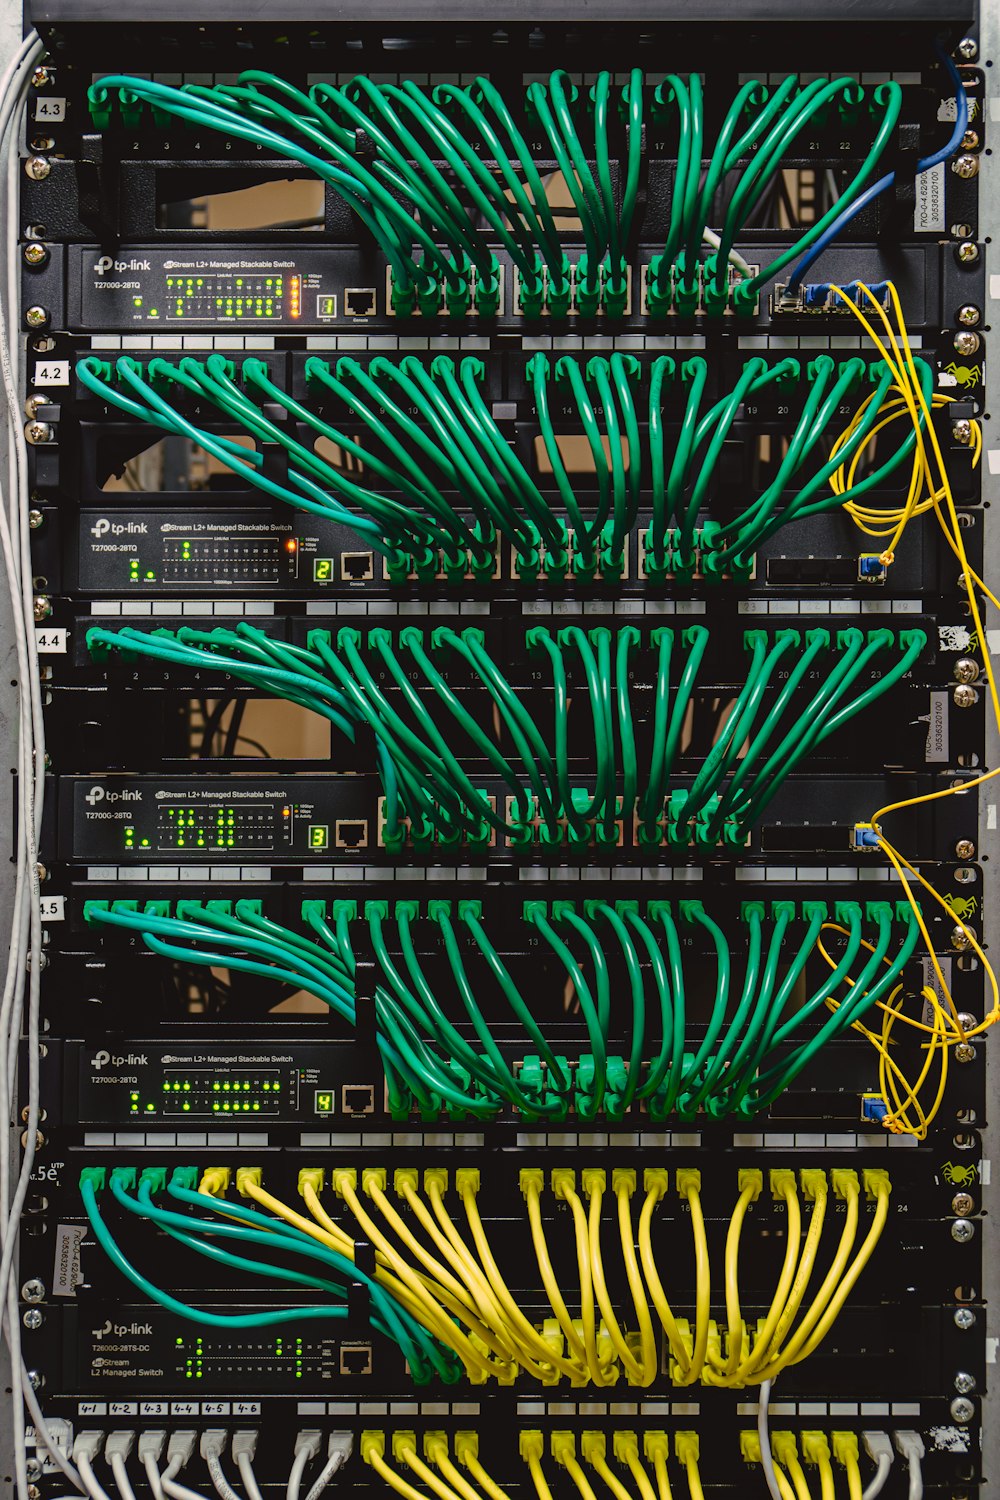 a rack with many wires and wires attached to it